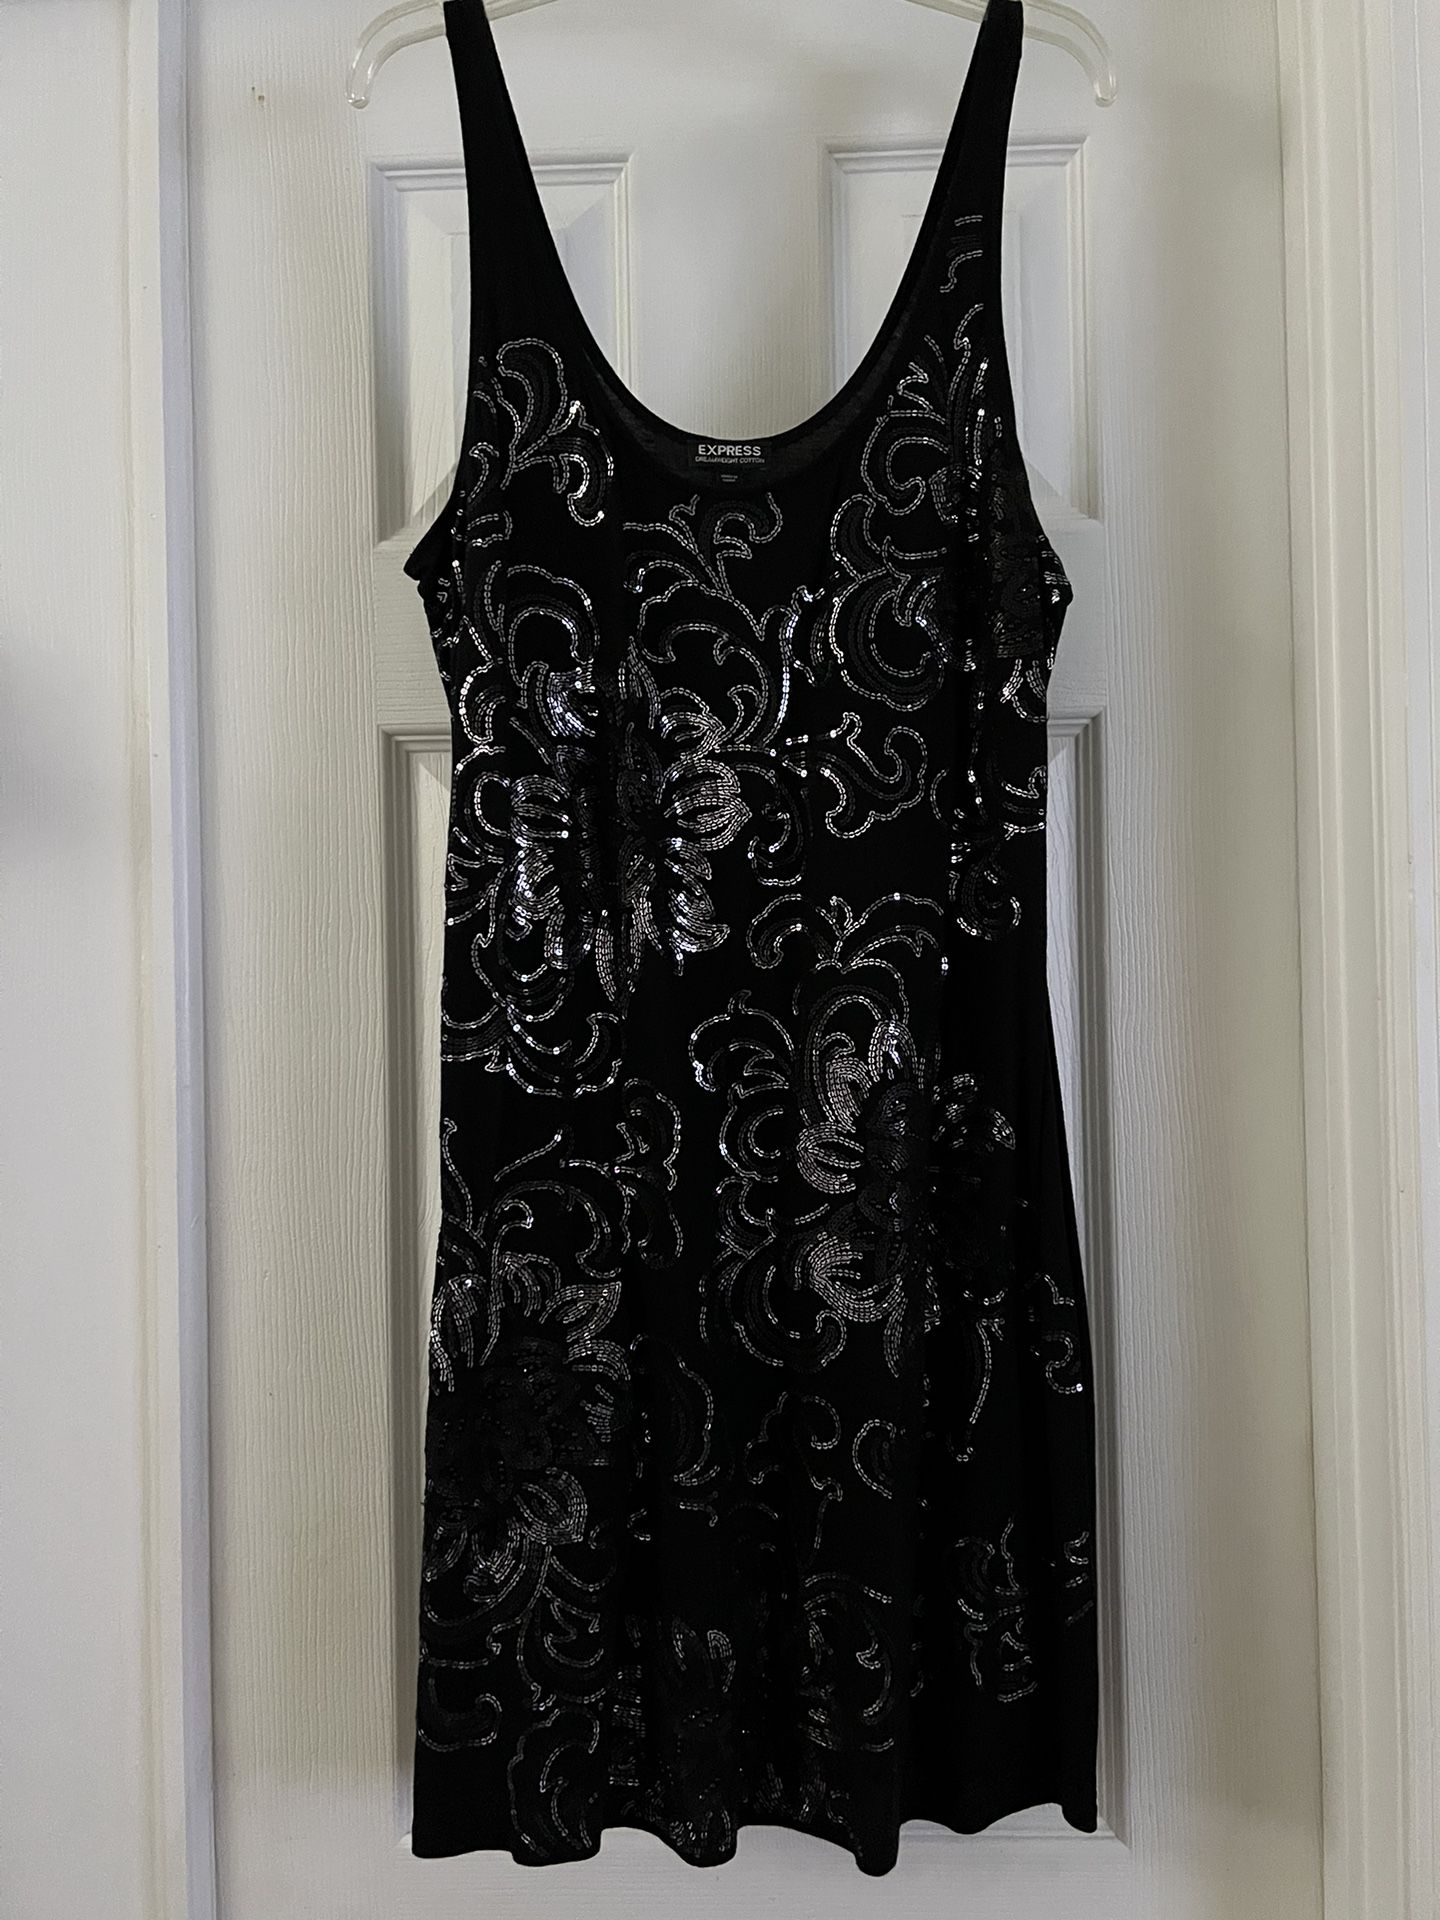 New Express Floral Sequin Lightweight Tunic Length Tank Top Dress Size Large